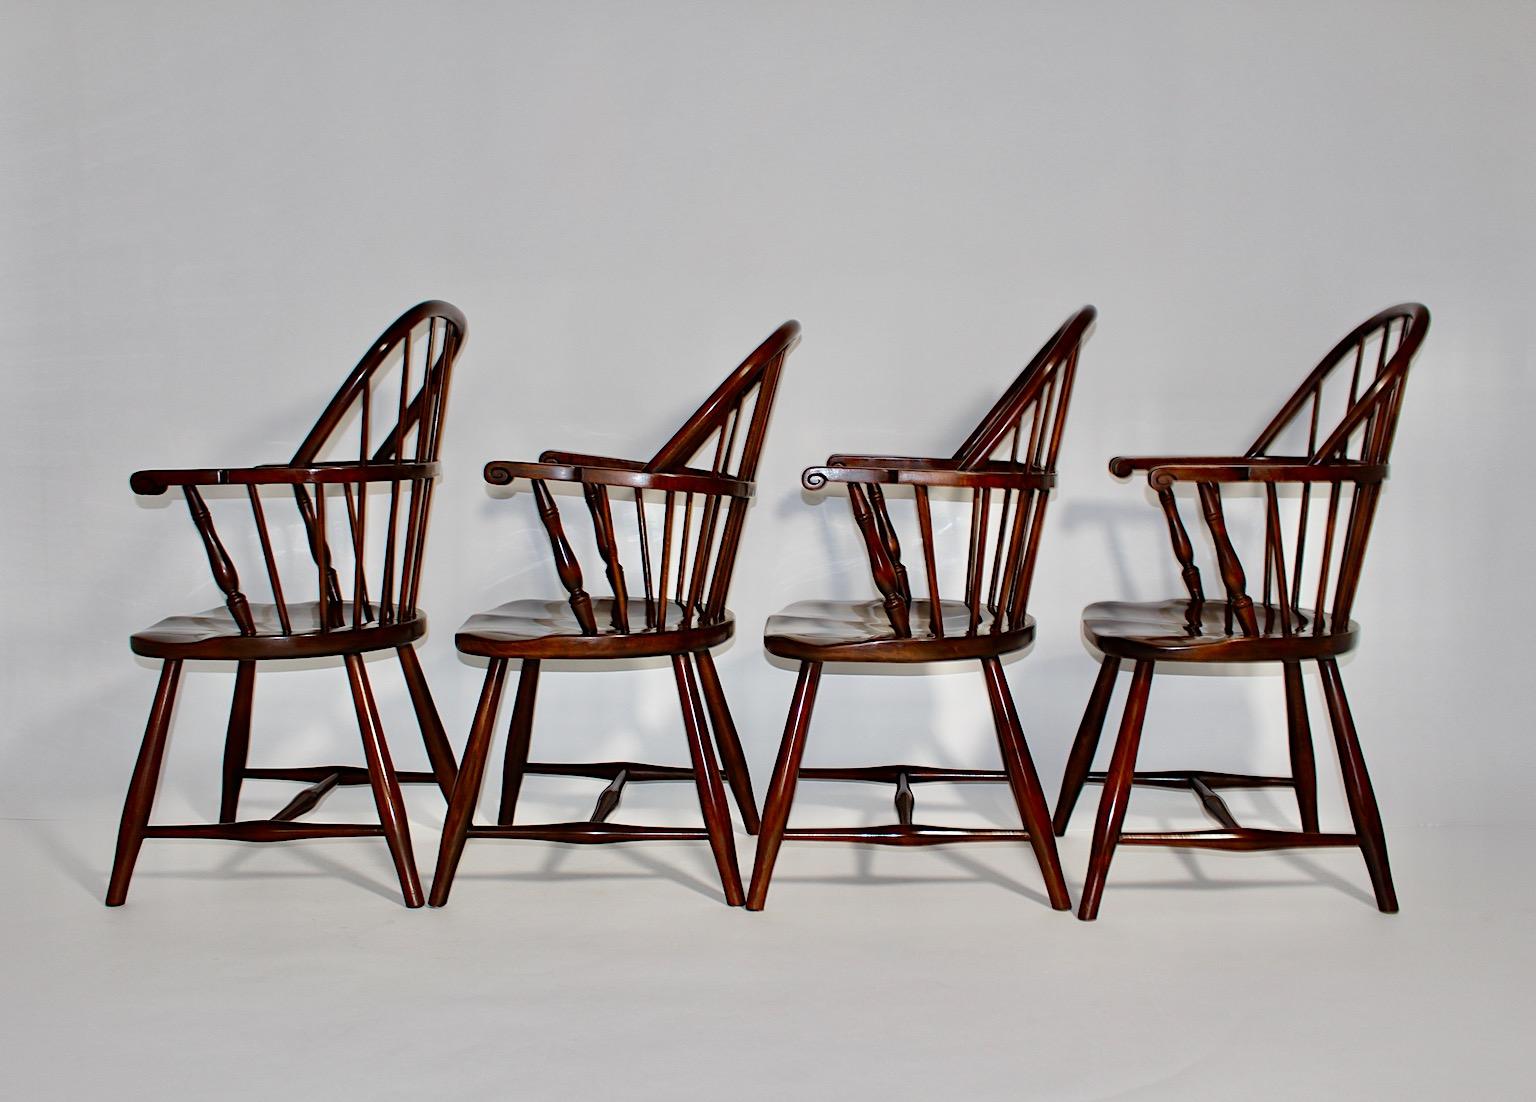 Art Deco vintage four ( 4 ) dining chairs or armchairs from brown stained beech design attributed to Josef Frank executed by the company Thonet circa 1925 Austria.
Each chair is labeled with company´s label underneath the seat.
These four ( 4 )